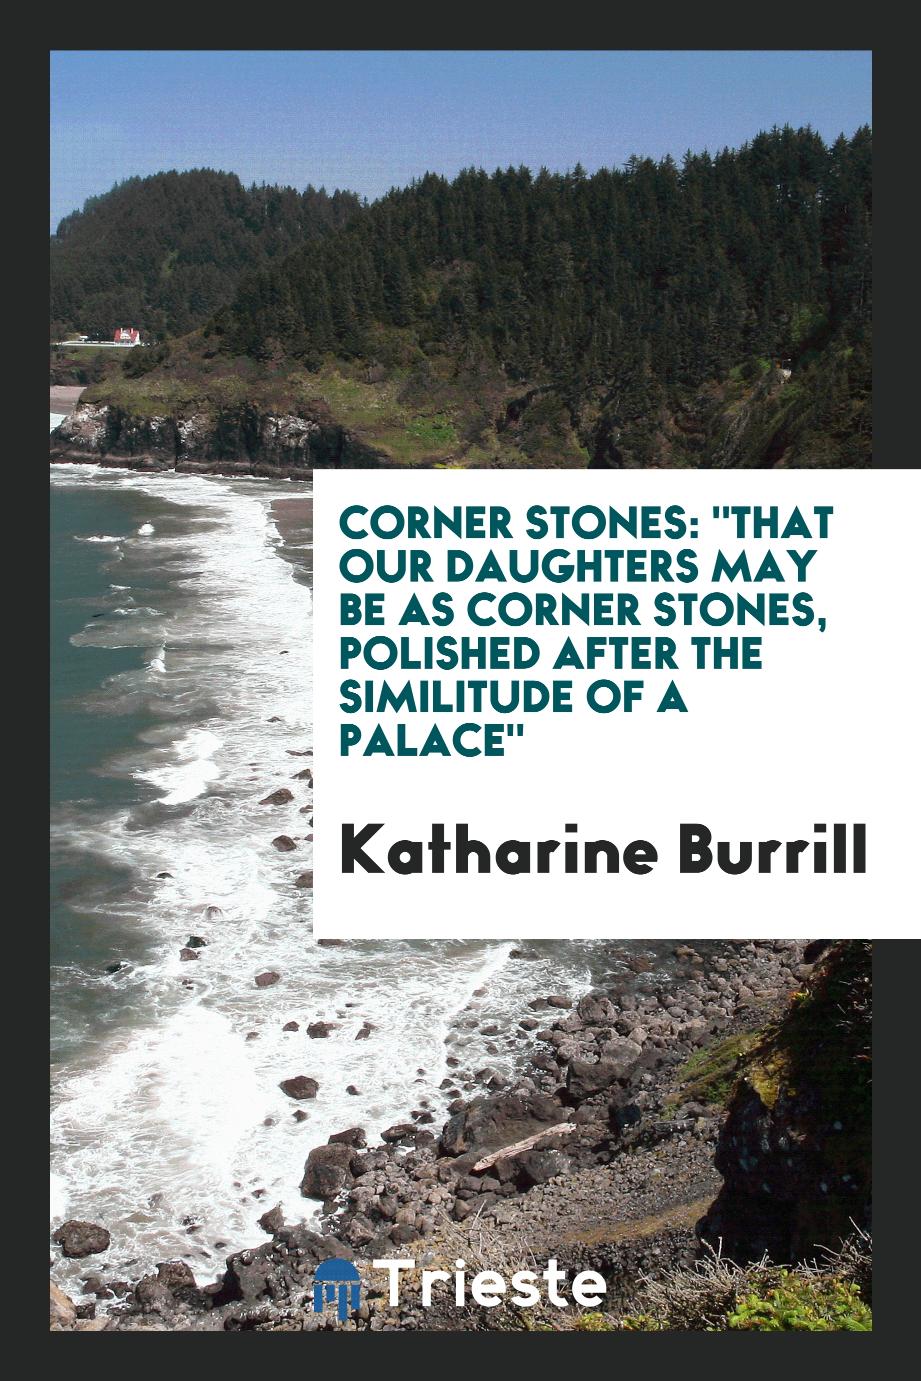 Corner Stones: "That Our Daughters May Be as Corner Stones, Polished after the Similitude of a Palace"